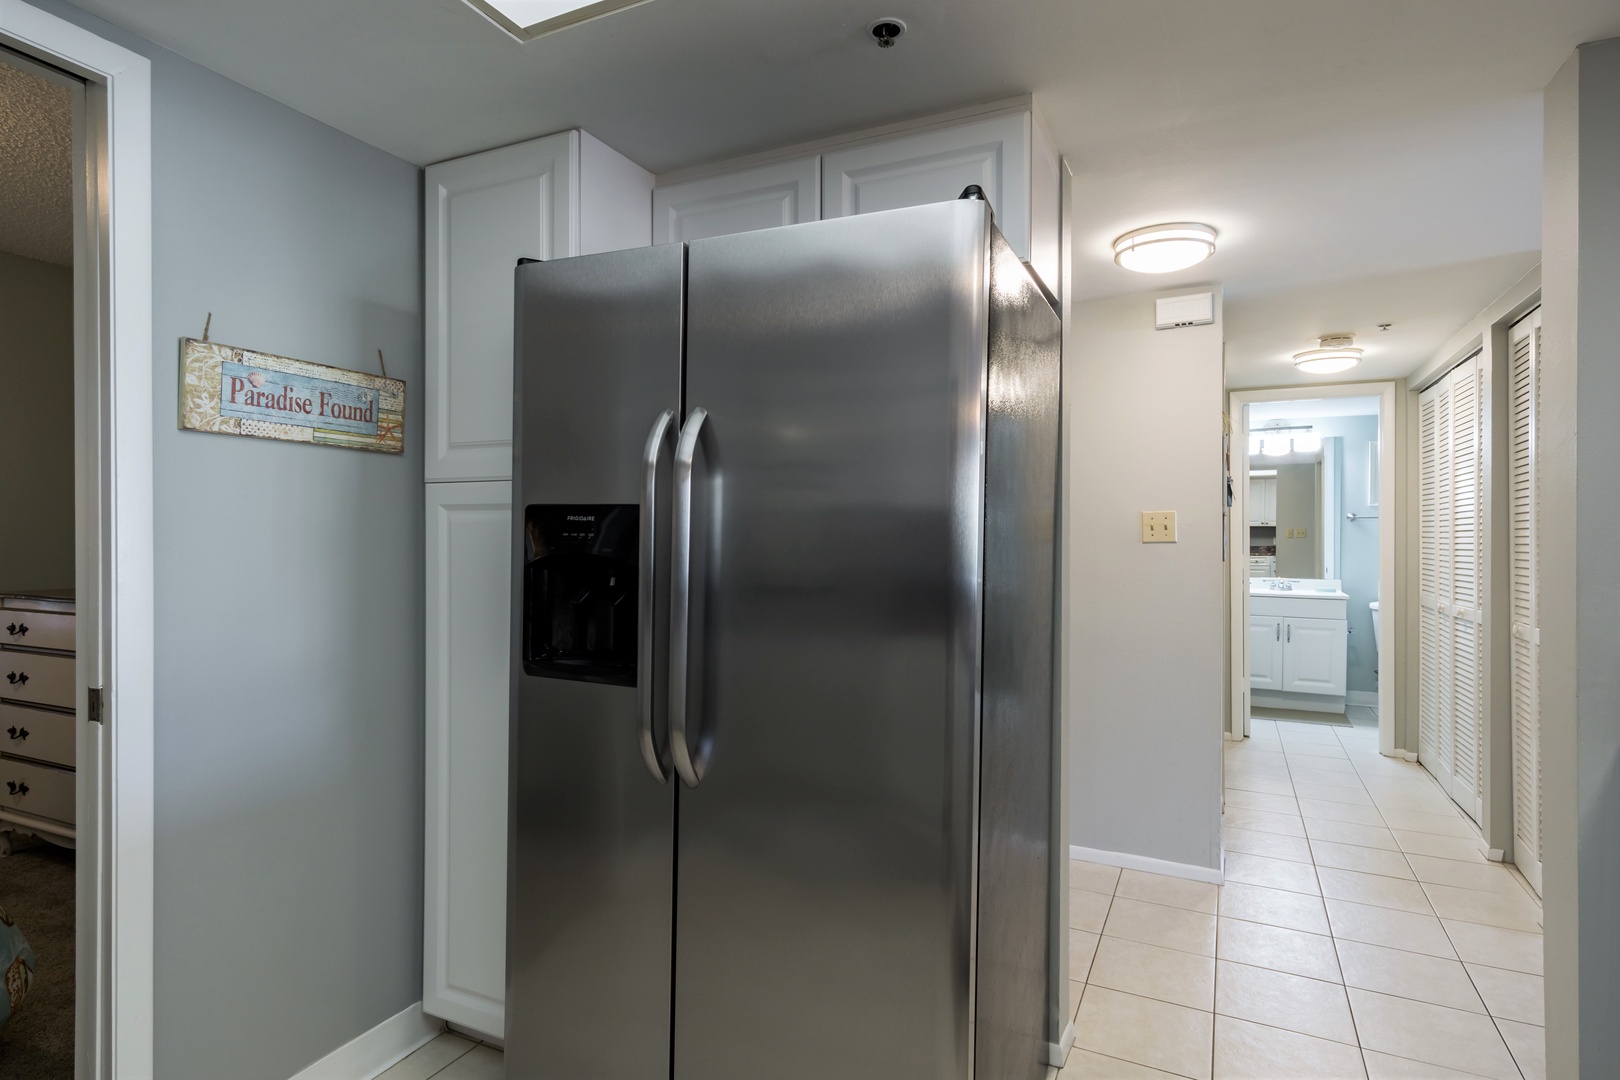 Stainless steel refrigerator in the kitchen.